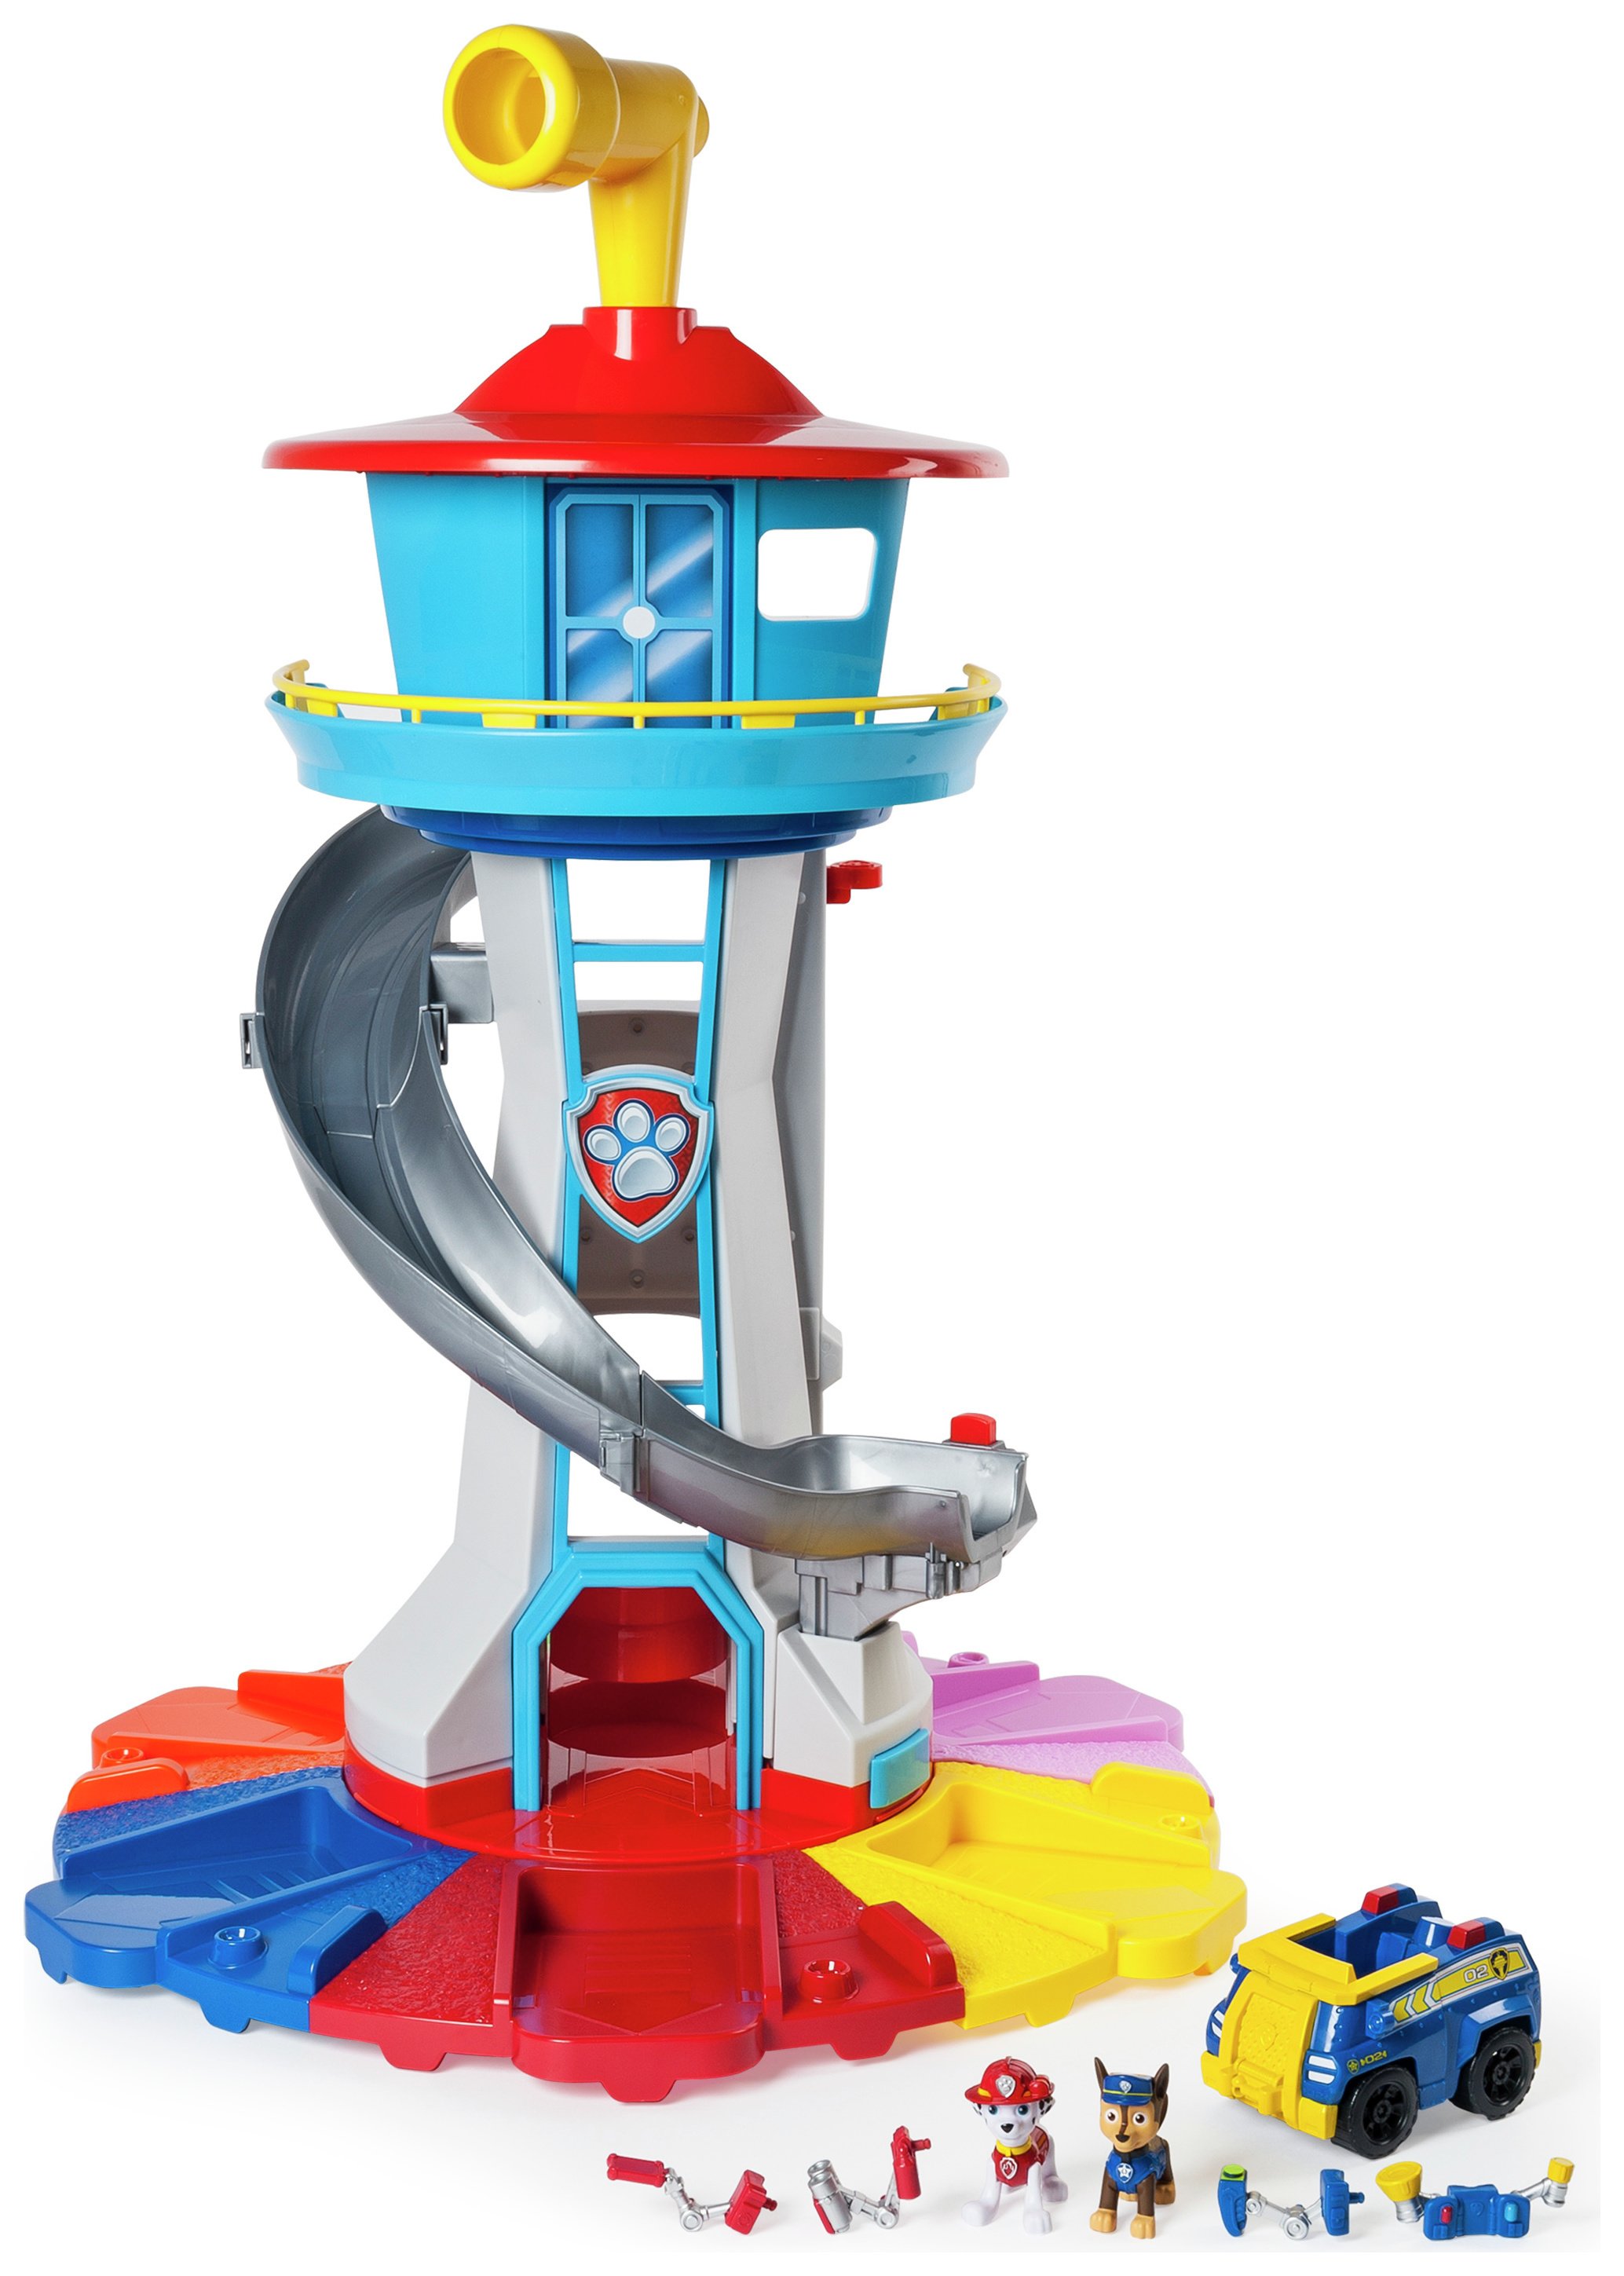 PAW Patrol My Size Lookout Tower Playset review